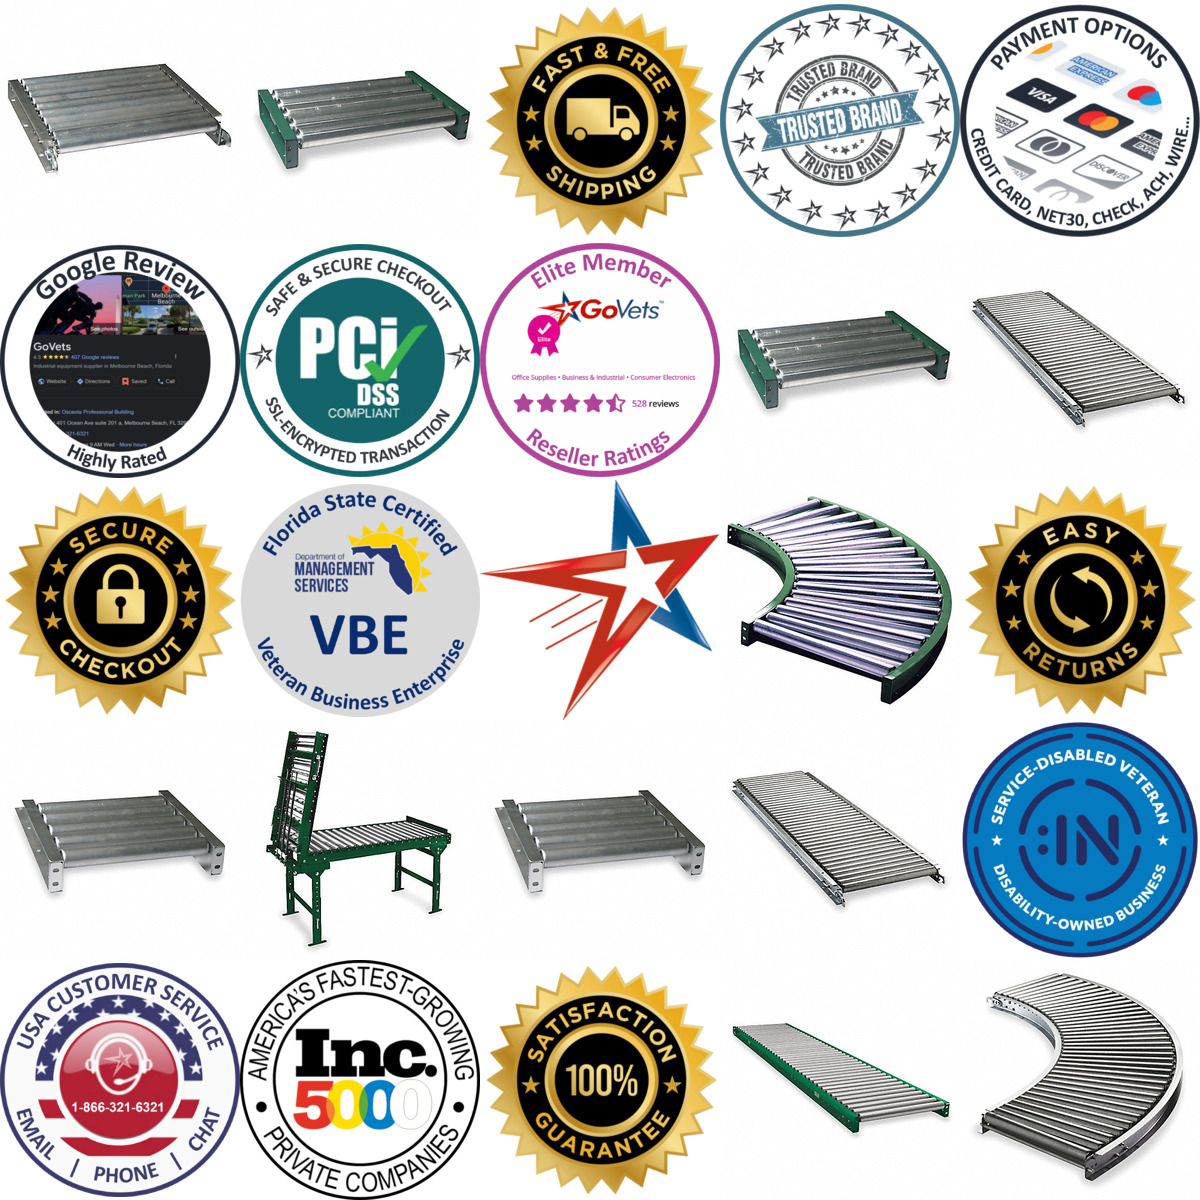 A selection of Roller Conveyors products on GoVets